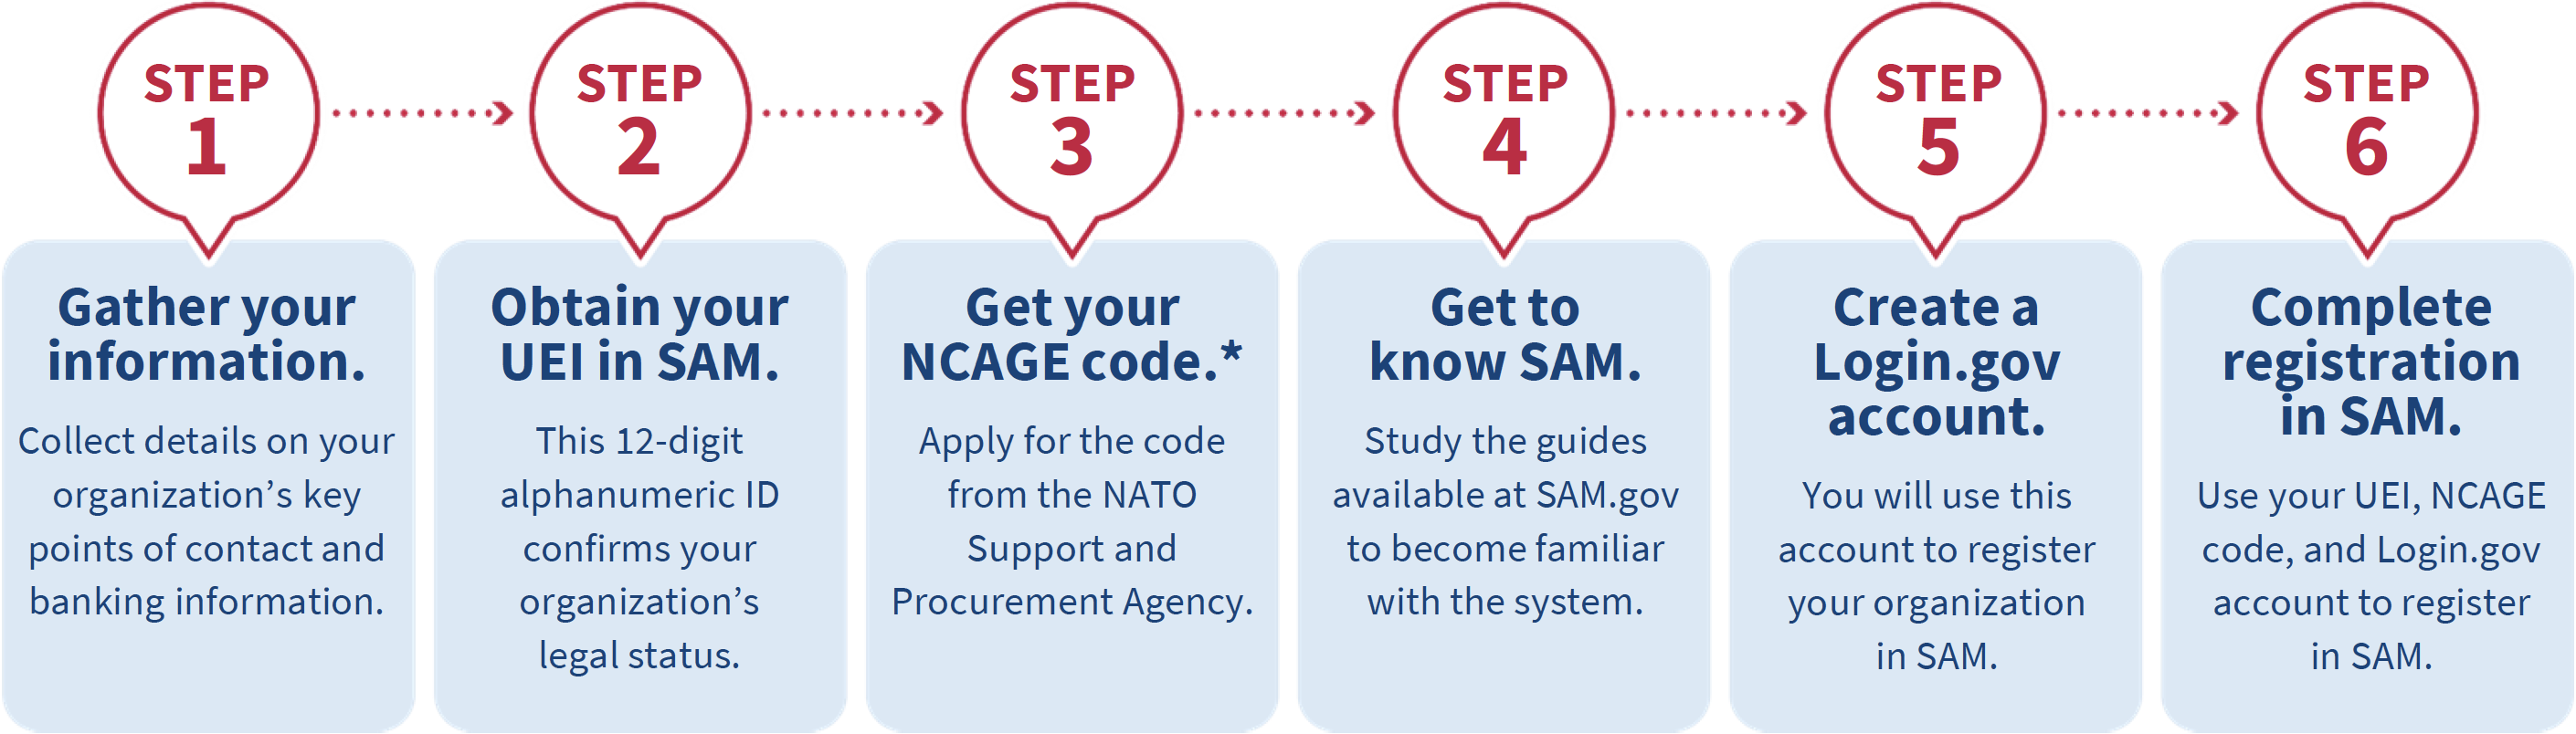 Registering to Work Module.Non-US Process Graphic